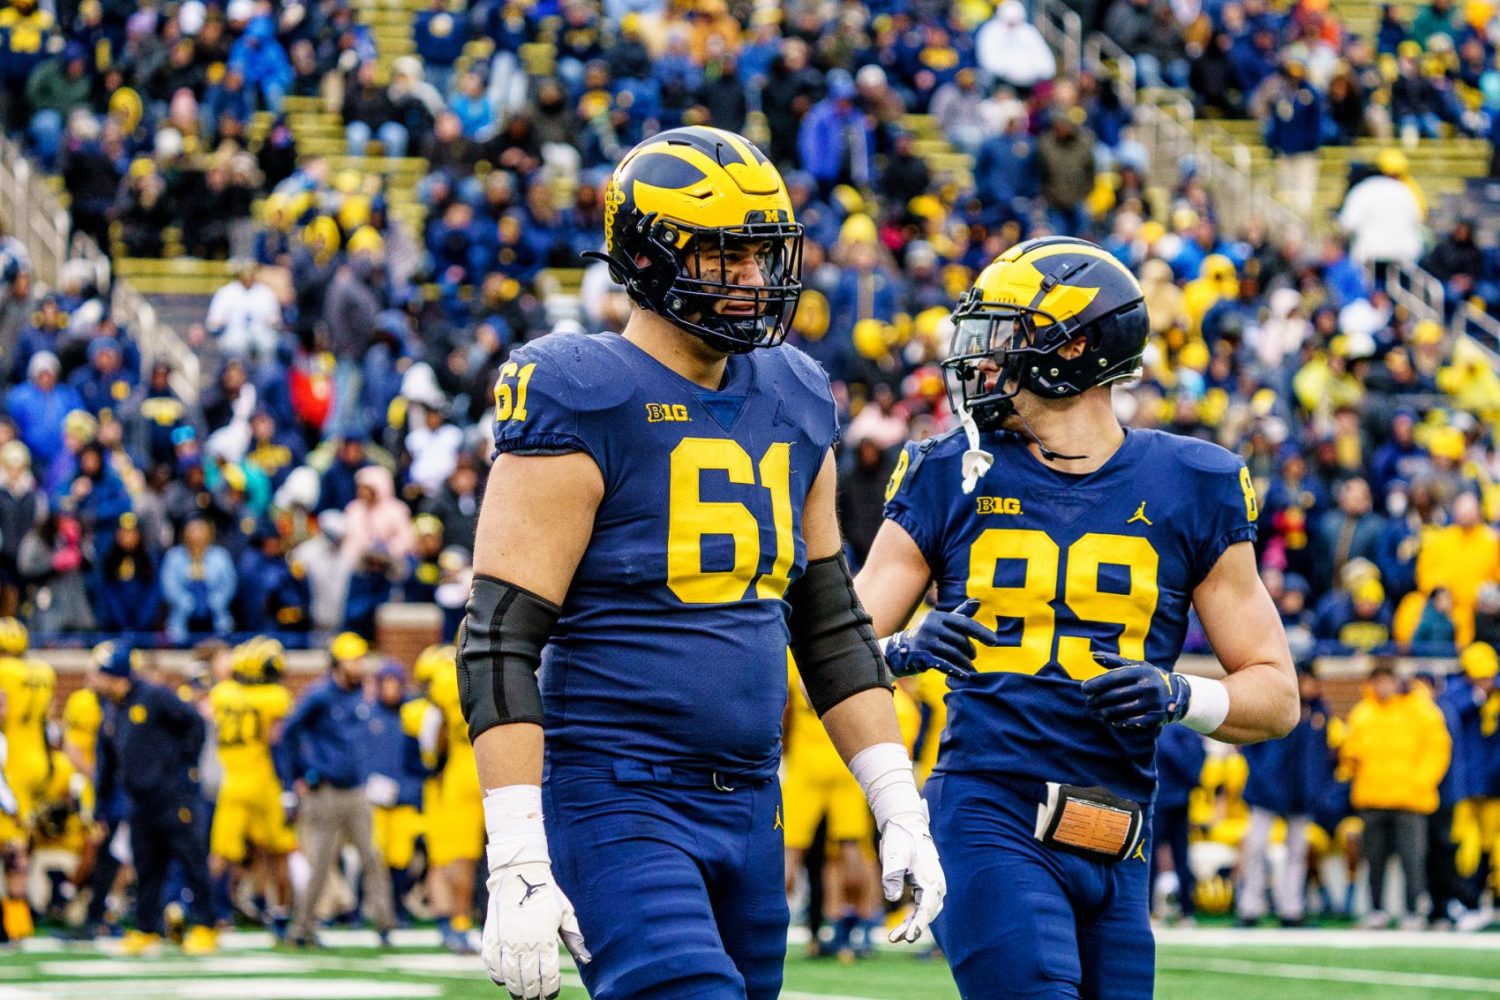 NM’s Stewart heading into senior season with highly touted Michigan Wolverines